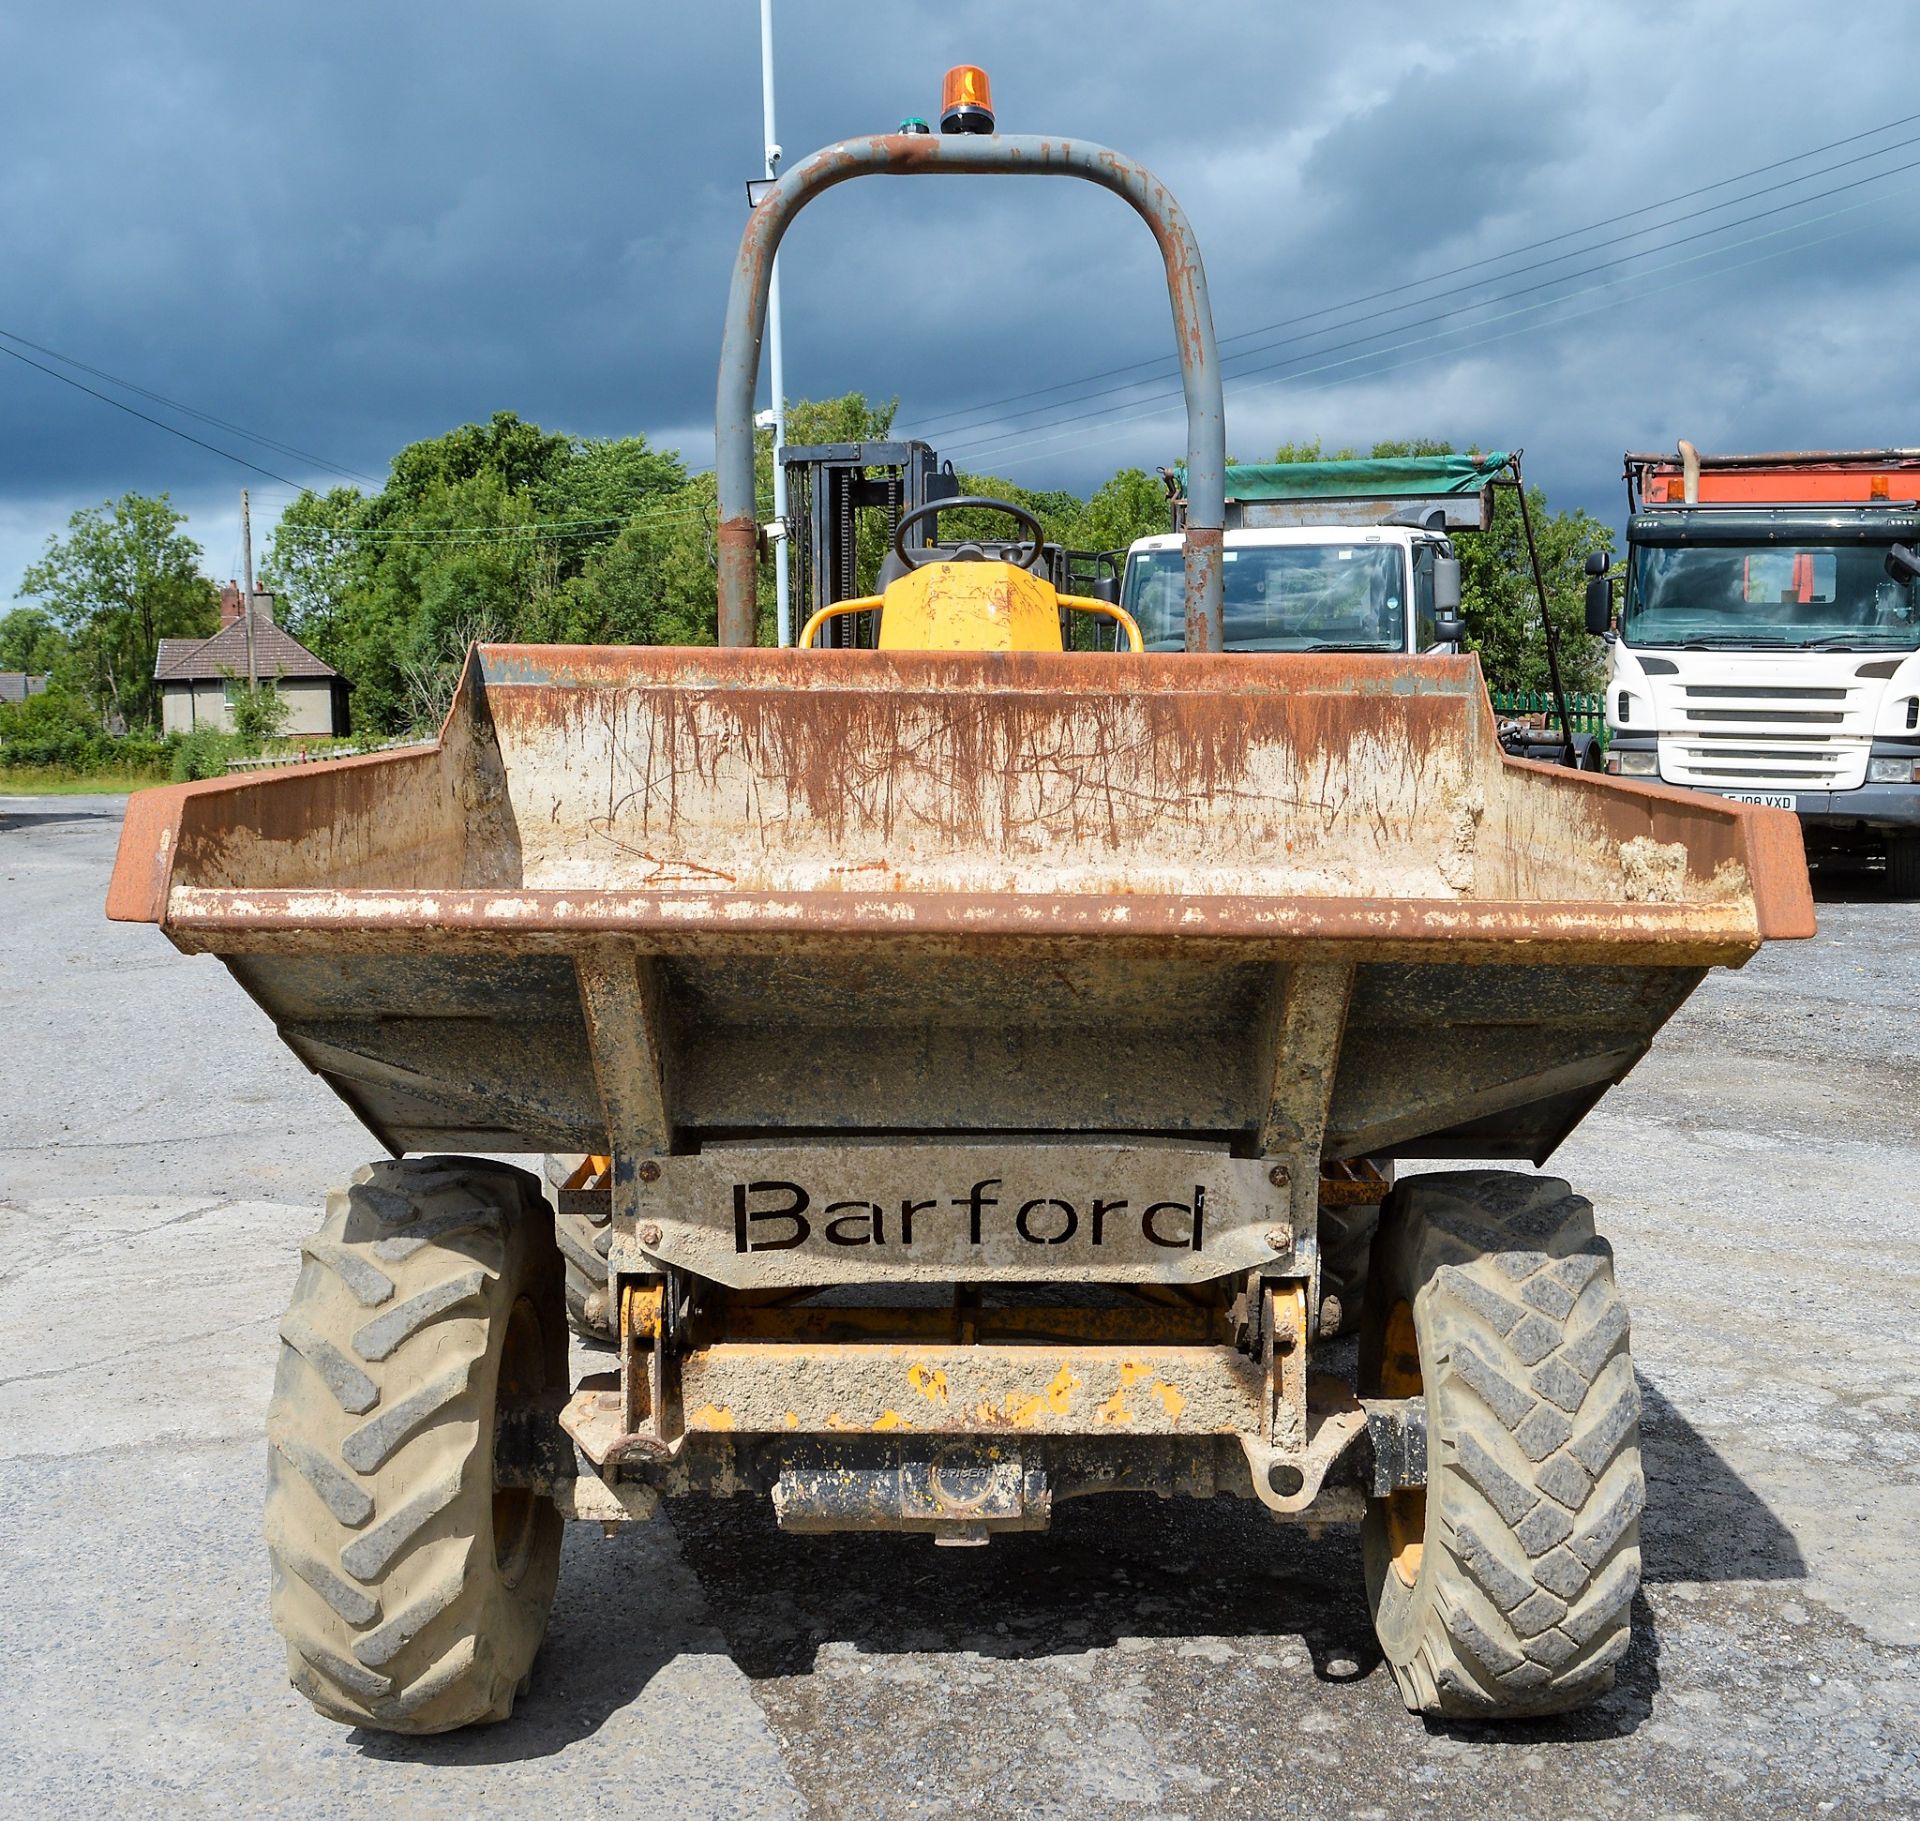 Barford 3 tonne straight skip dumper Year: 2006 S/N: SBTH0815 Recorded Hours: Not displayed (Clock - Image 5 of 11